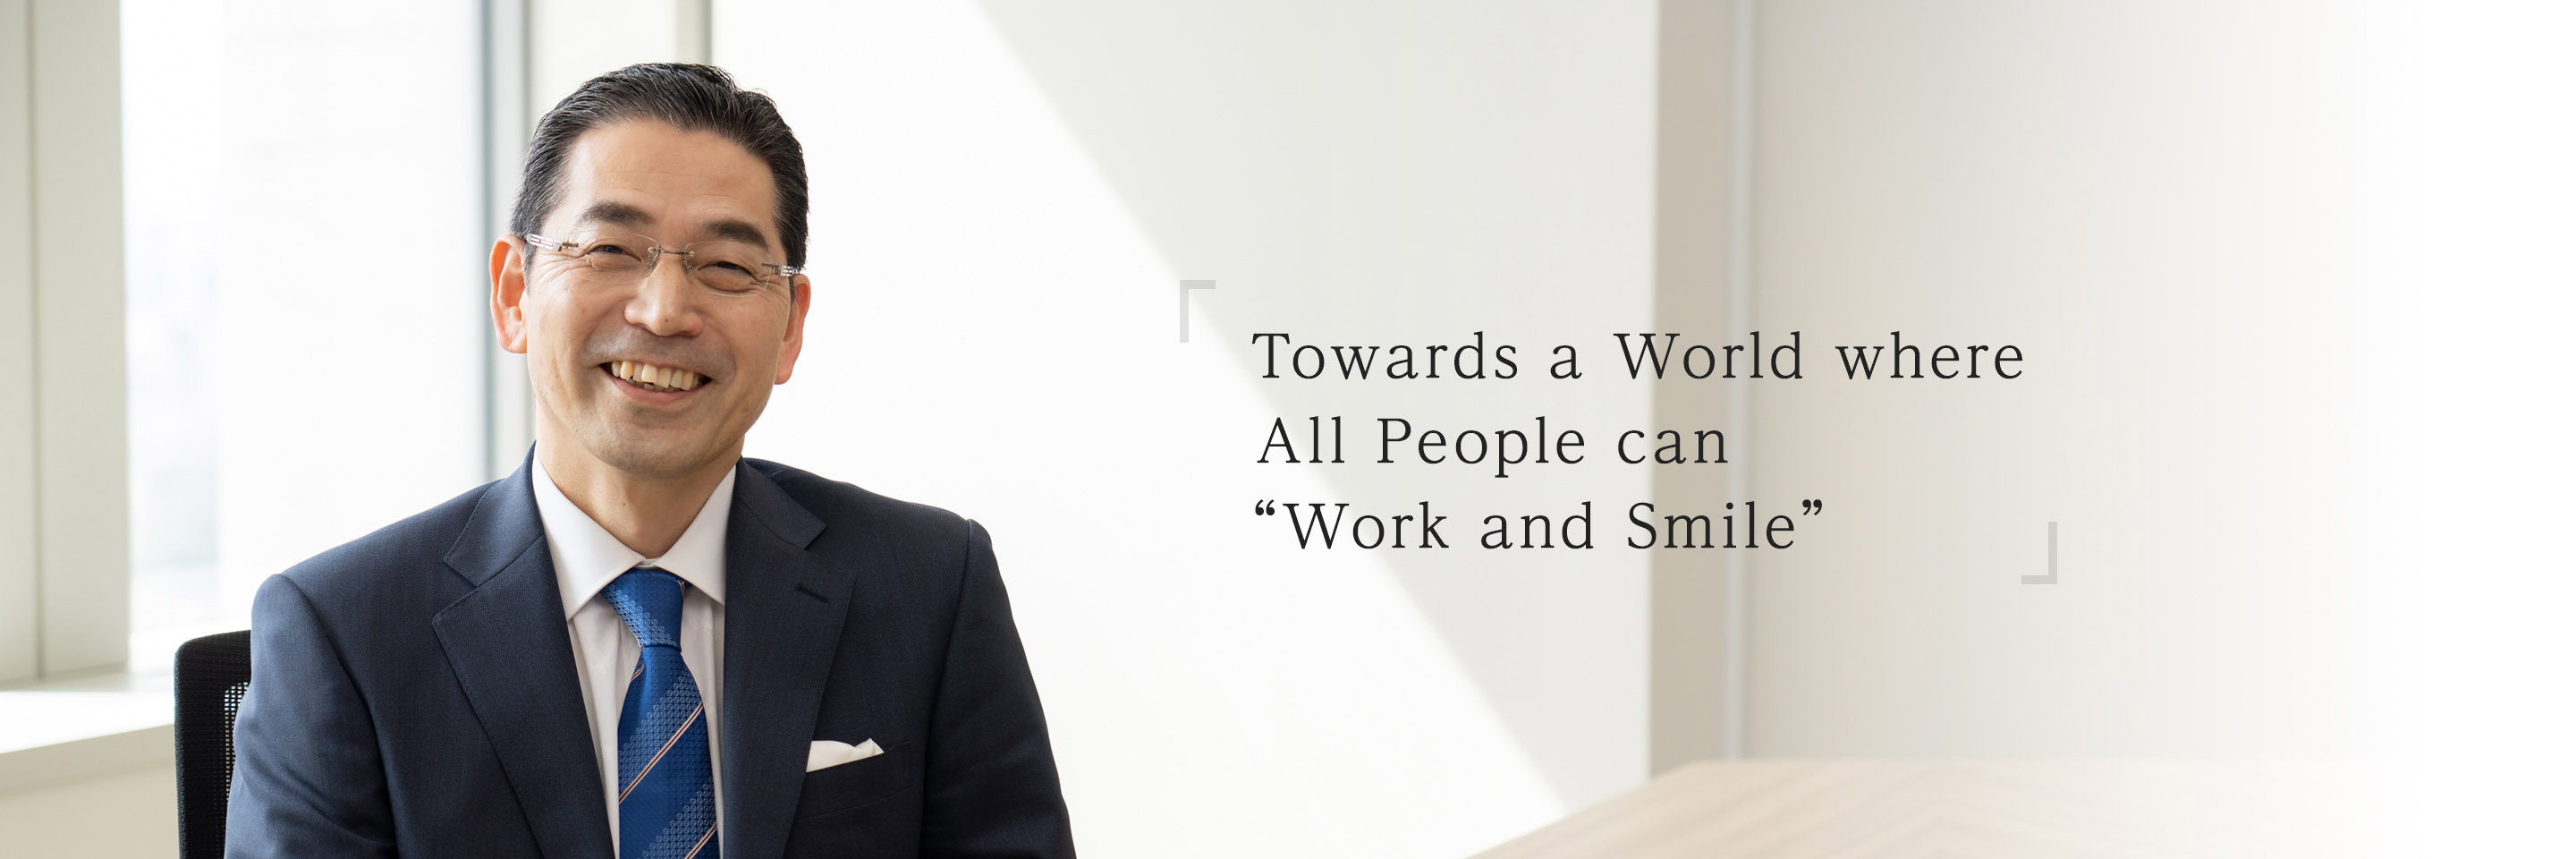 Takao Wada	PERSOL Group Representative. Aiming for a society where people can “Work and Smile”